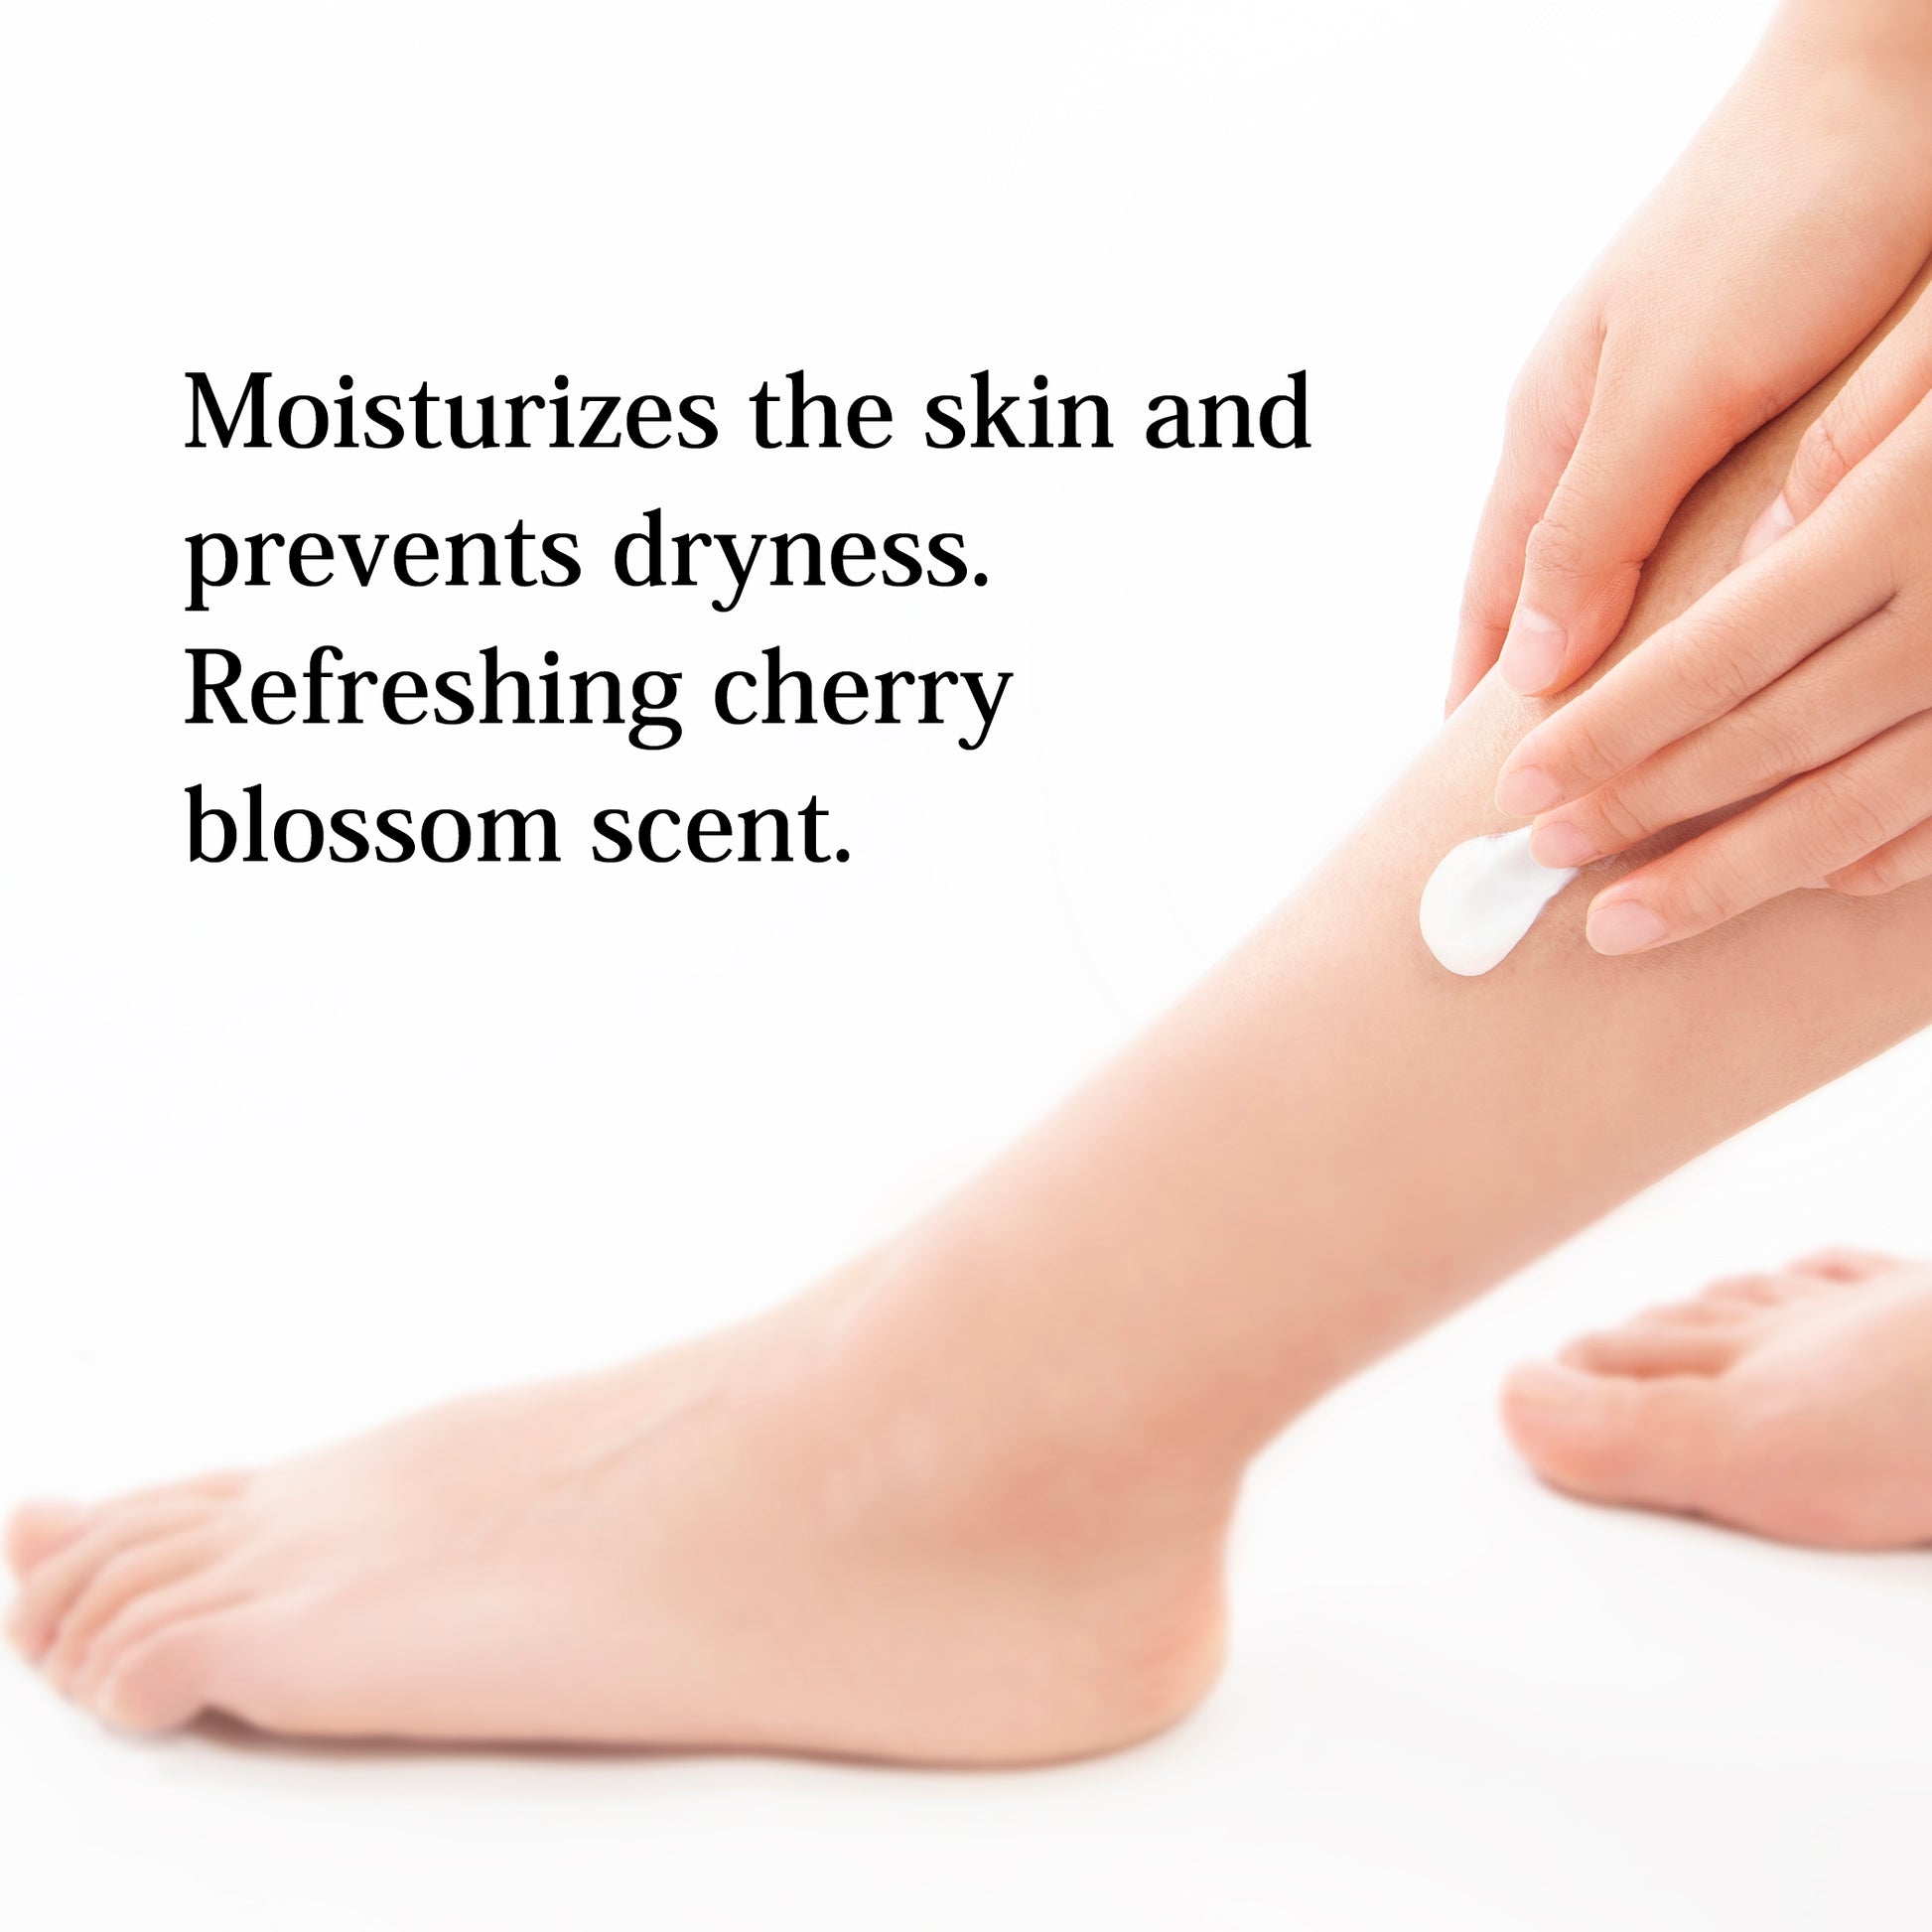 Moisturizes the skin and prevents dryness Refreshing cherry blossam scent.